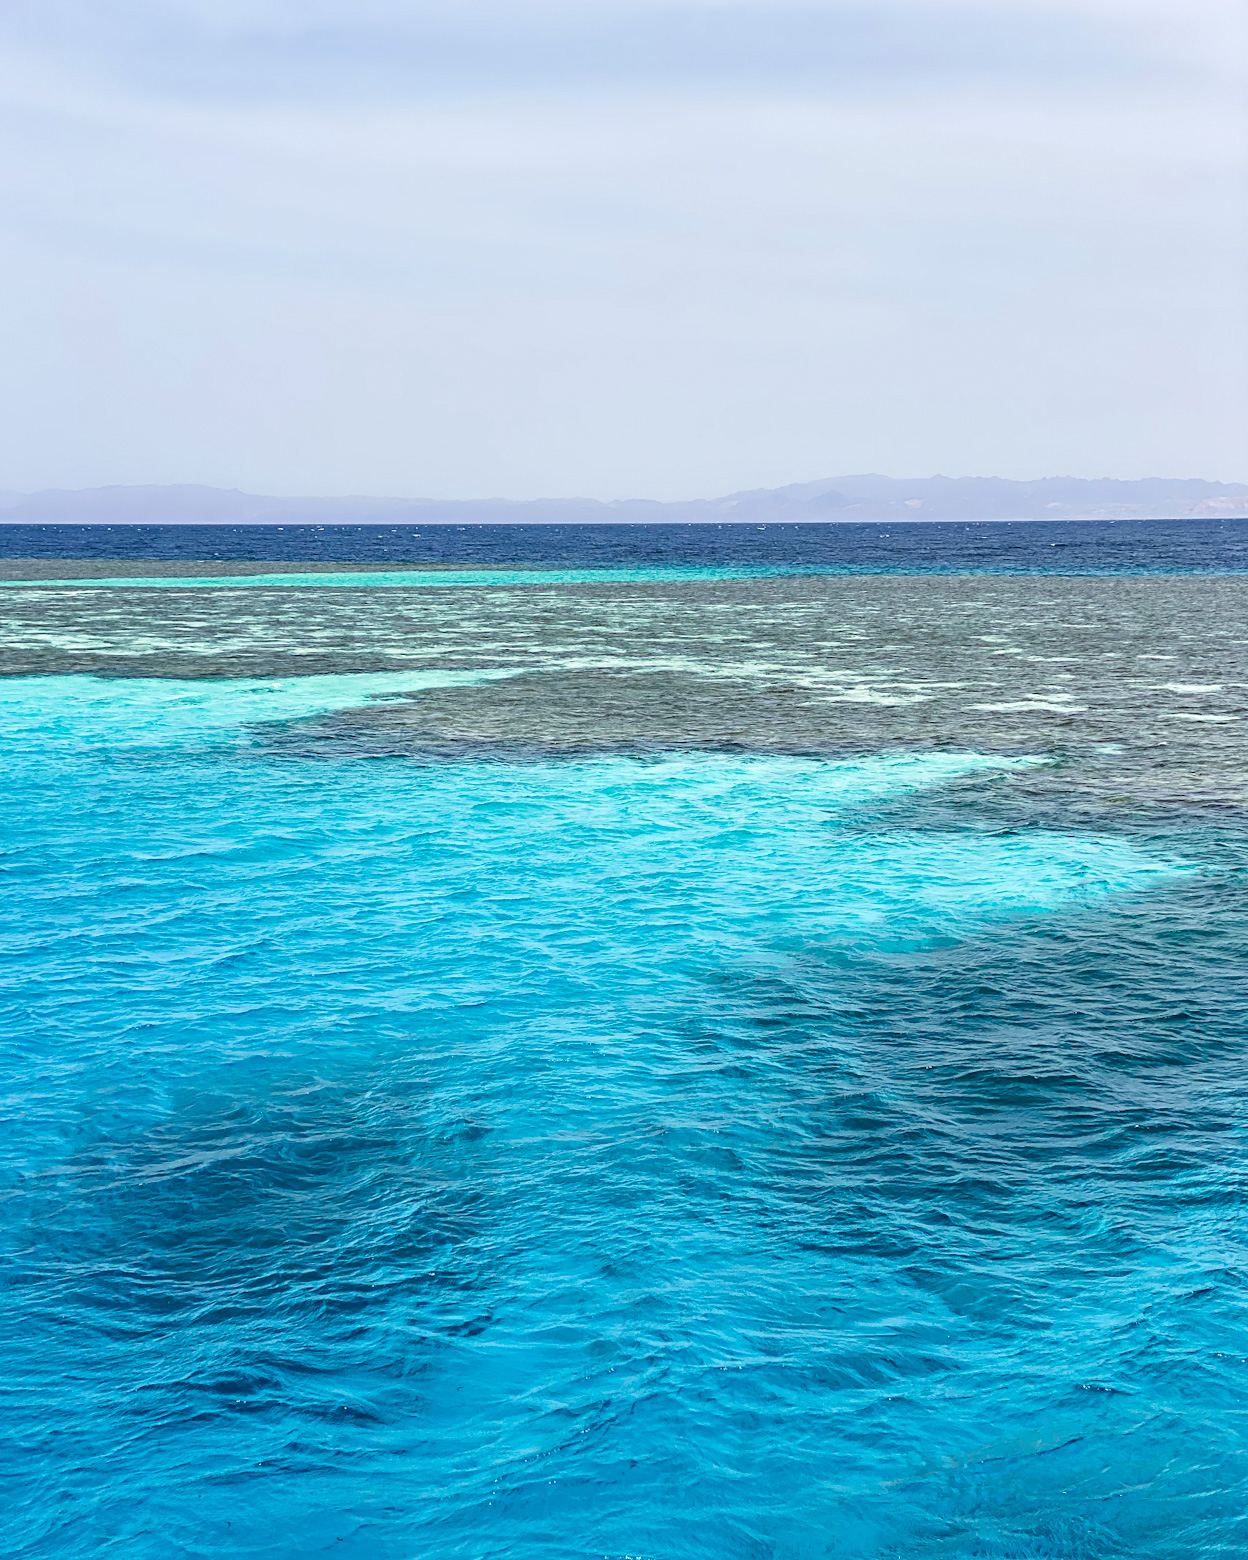 Serene view of the breathtaking turquoise reef in Dahab, Egypt.